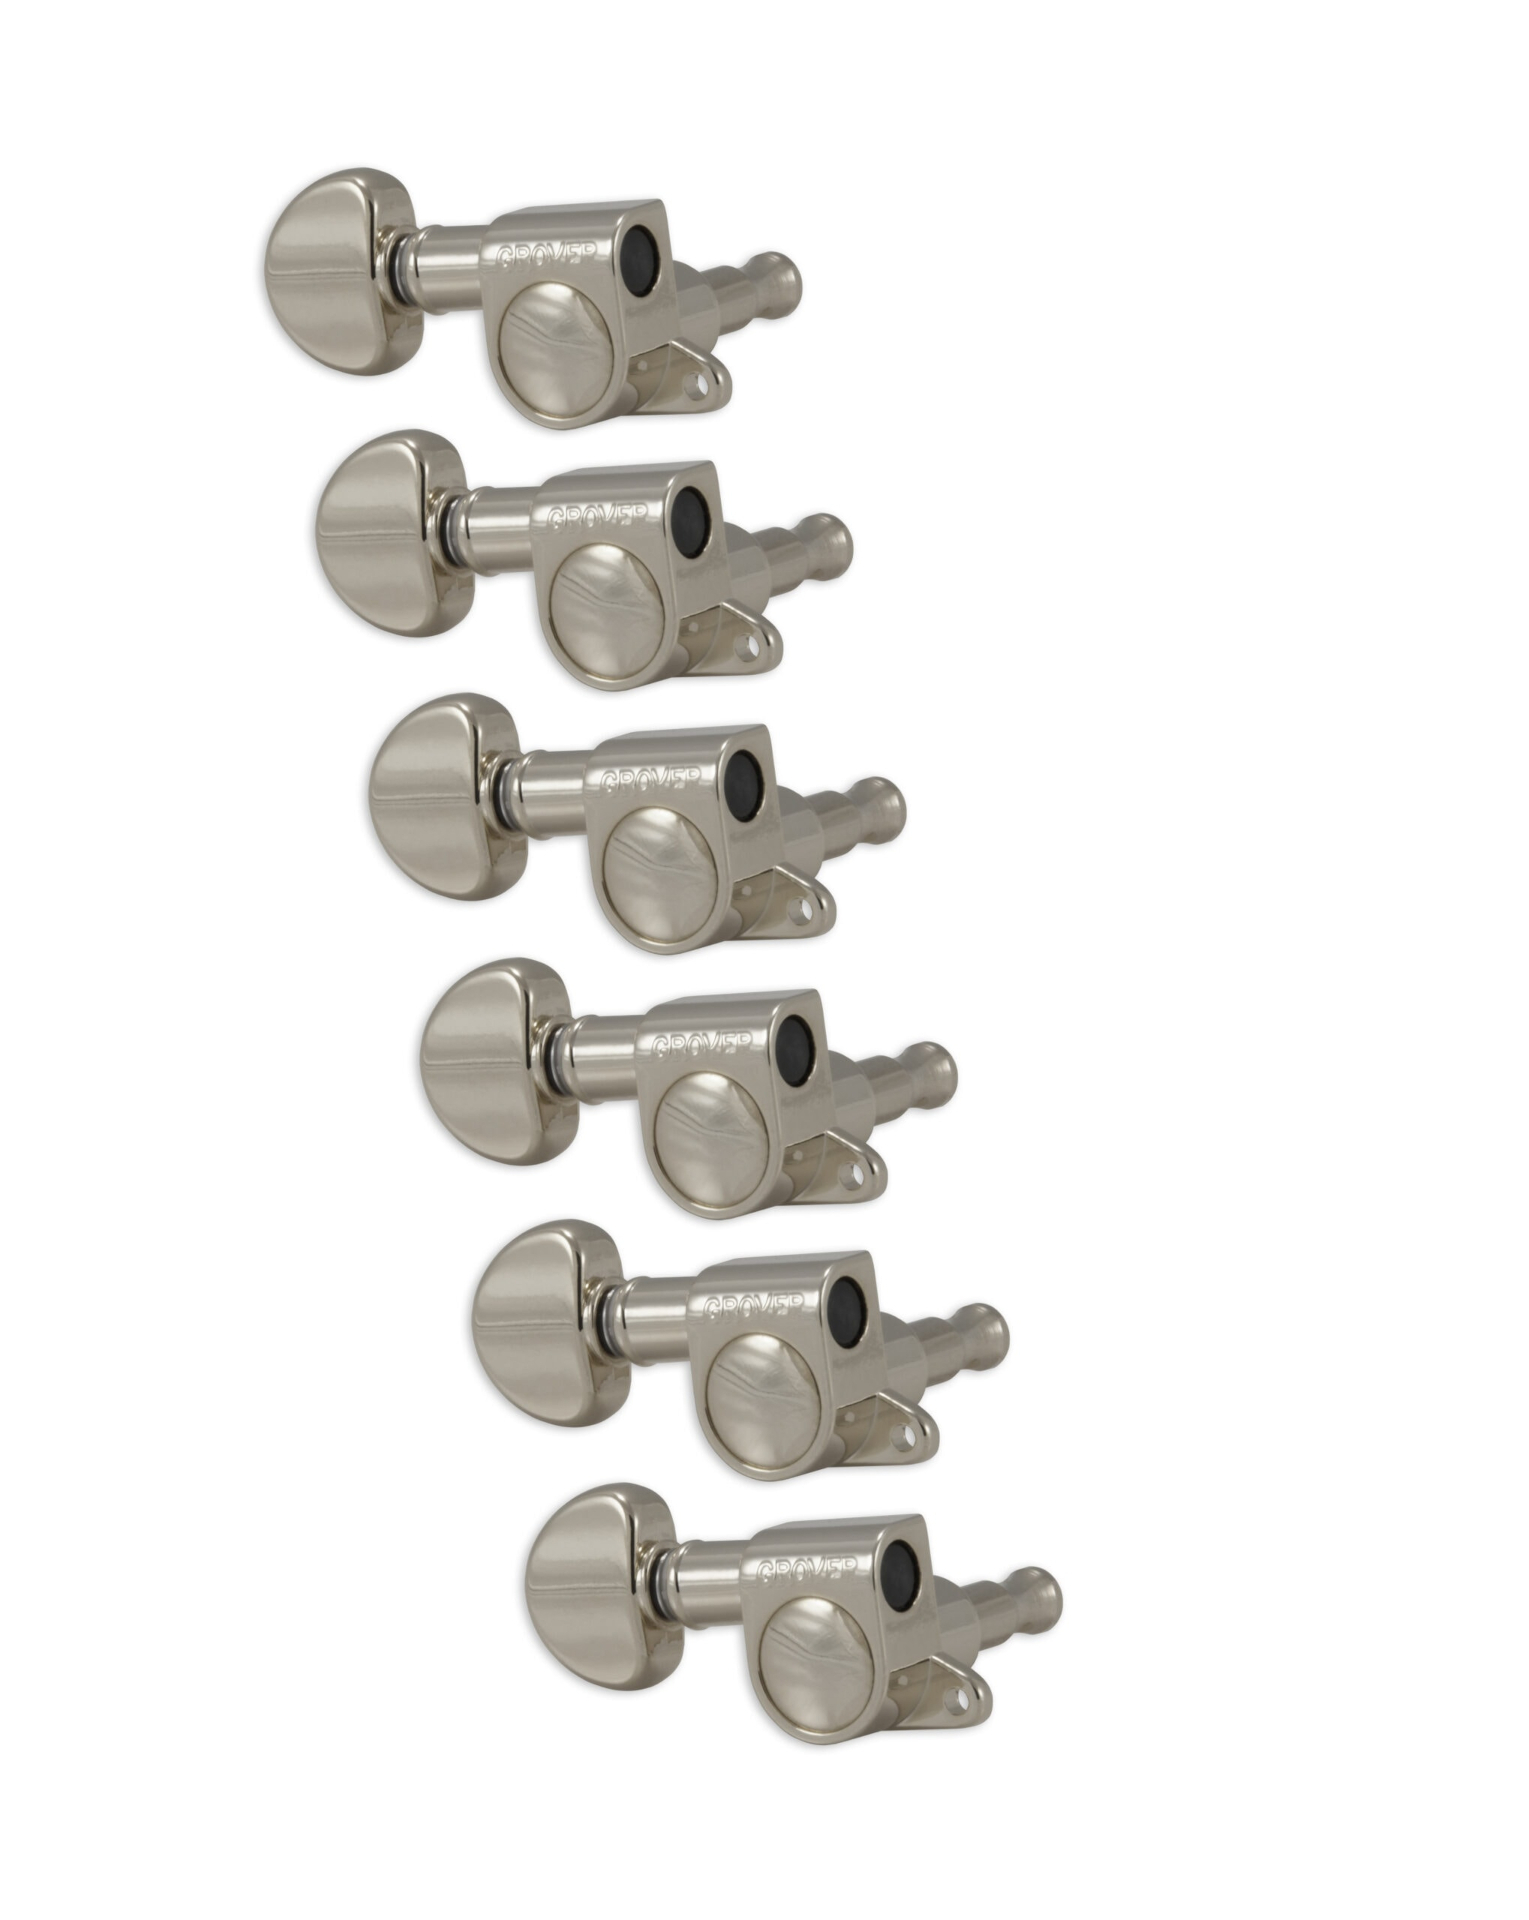 Grover 205NL6 Mini Rotomatics with Round Button - Guitar Machine Heads, 6-in-Line, Lefthand, Treble Side (Right) -  Nickel